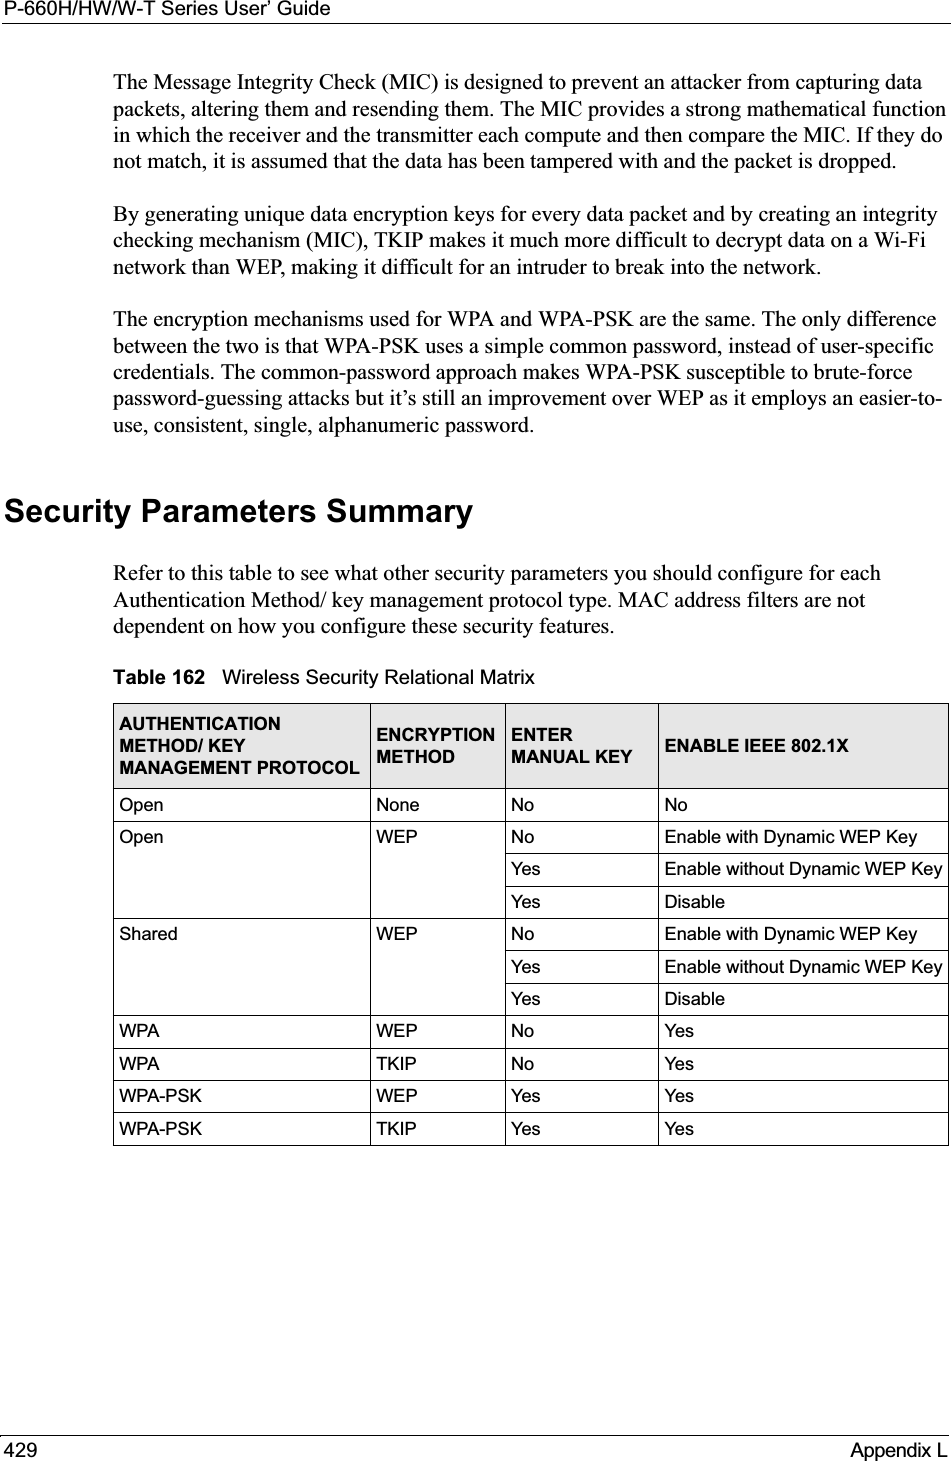 P-660H/HW/W-T Series User’ Guide429 Appendix LThe Message Integrity Check (MIC) is designed to prevent an attacker from capturing data packets, altering them and resending them. The MIC provides a strong mathematical function in which the receiver and the transmitter each compute and then compare the MIC. If they do not match, it is assumed that the data has been tampered with and the packet is dropped. By generating unique data encryption keys for every data packet and by creating an integrity checking mechanism (MIC), TKIP makes it much more difficult to decrypt data on a Wi-Fi network than WEP, making it difficult for an intruder to break into the network. The encryption mechanisms used for WPA and WPA-PSK are the same. The only difference between the two is that WPA-PSK uses a simple common password, instead of user-specific credentials. The common-password approach makes WPA-PSK susceptible to brute-force password-guessing attacks but it’s still an improvement over WEP as it employs an easier-to-use, consistent, single, alphanumeric password.Security Parameters SummaryRefer to this table to see what other security parameters you should configure for each Authentication Method/ key management protocol type. MAC address filters are not dependent on how you configure these security features.Table 162   Wireless Security Relational MatrixAUTHENTICATIONMETHOD/ KEY MANAGEMENT PROTOCOLENCRYPTIONMETHODENTER MANUAL KEY ENABLE IEEE 802.1X Open None No NoOpen WEP No Enable with Dynamic WEP Key Yes Enable without Dynamic WEP KeyYes Disable Shared WEP  No Enable with Dynamic WEP KeyYes Enable without Dynamic WEP KeyYes Disable WPA WEP No YesWPA TKIP No YesWPA-PSK WEP Yes Yes WPA-PSK TKIP Yes Yes